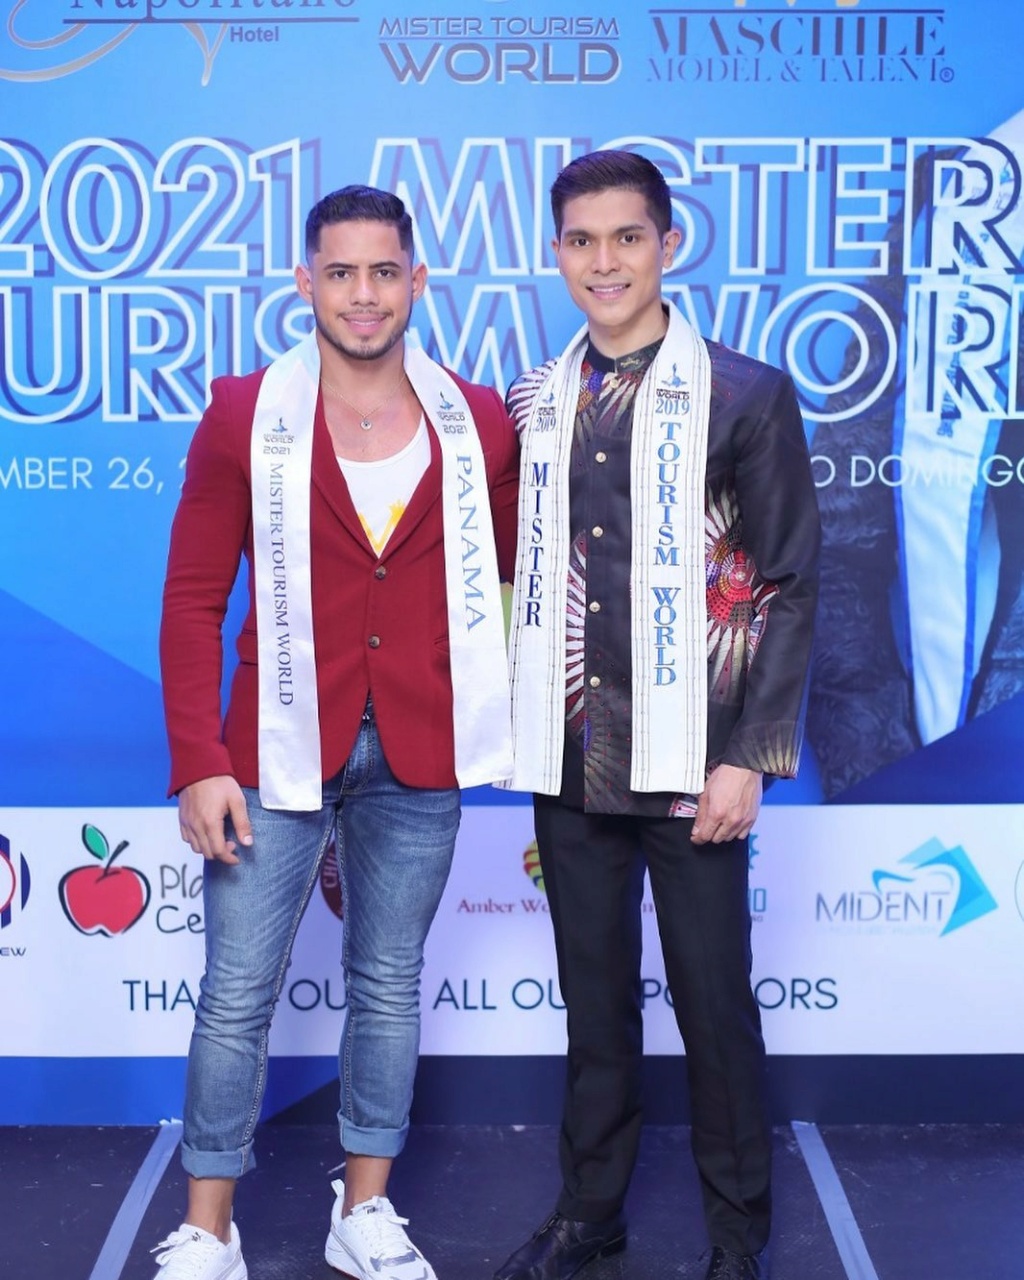 5th Mister Tourism World 2020/2021 is Dominican Republic - Page 2 26271310